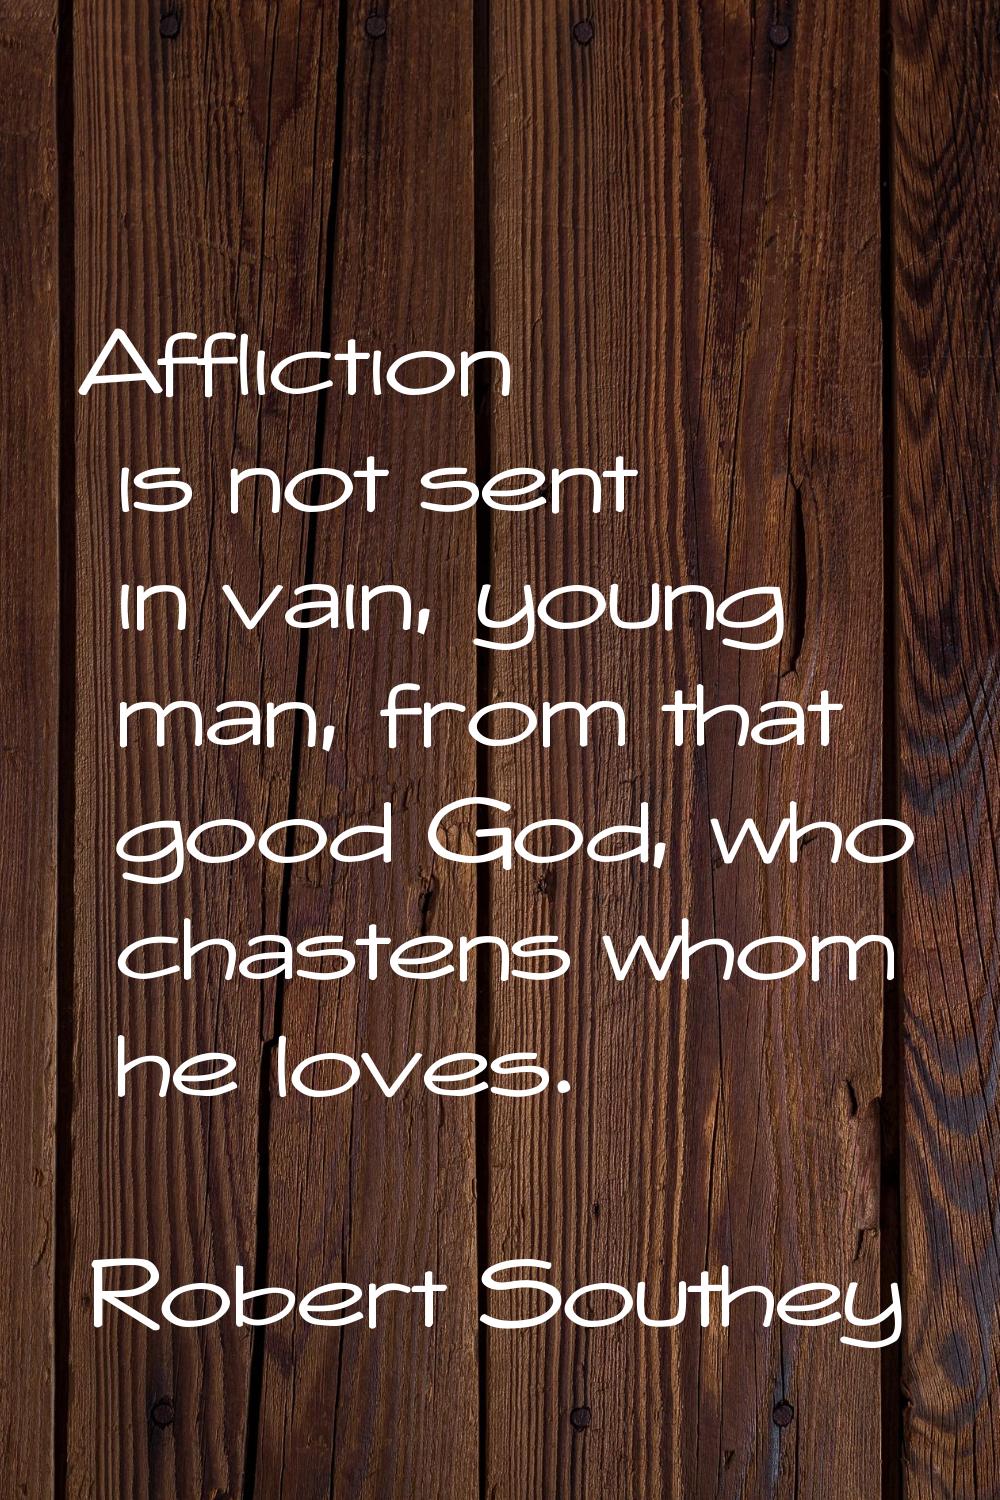 Affliction is not sent in vain, young man, from that good God, who chastens whom he loves.